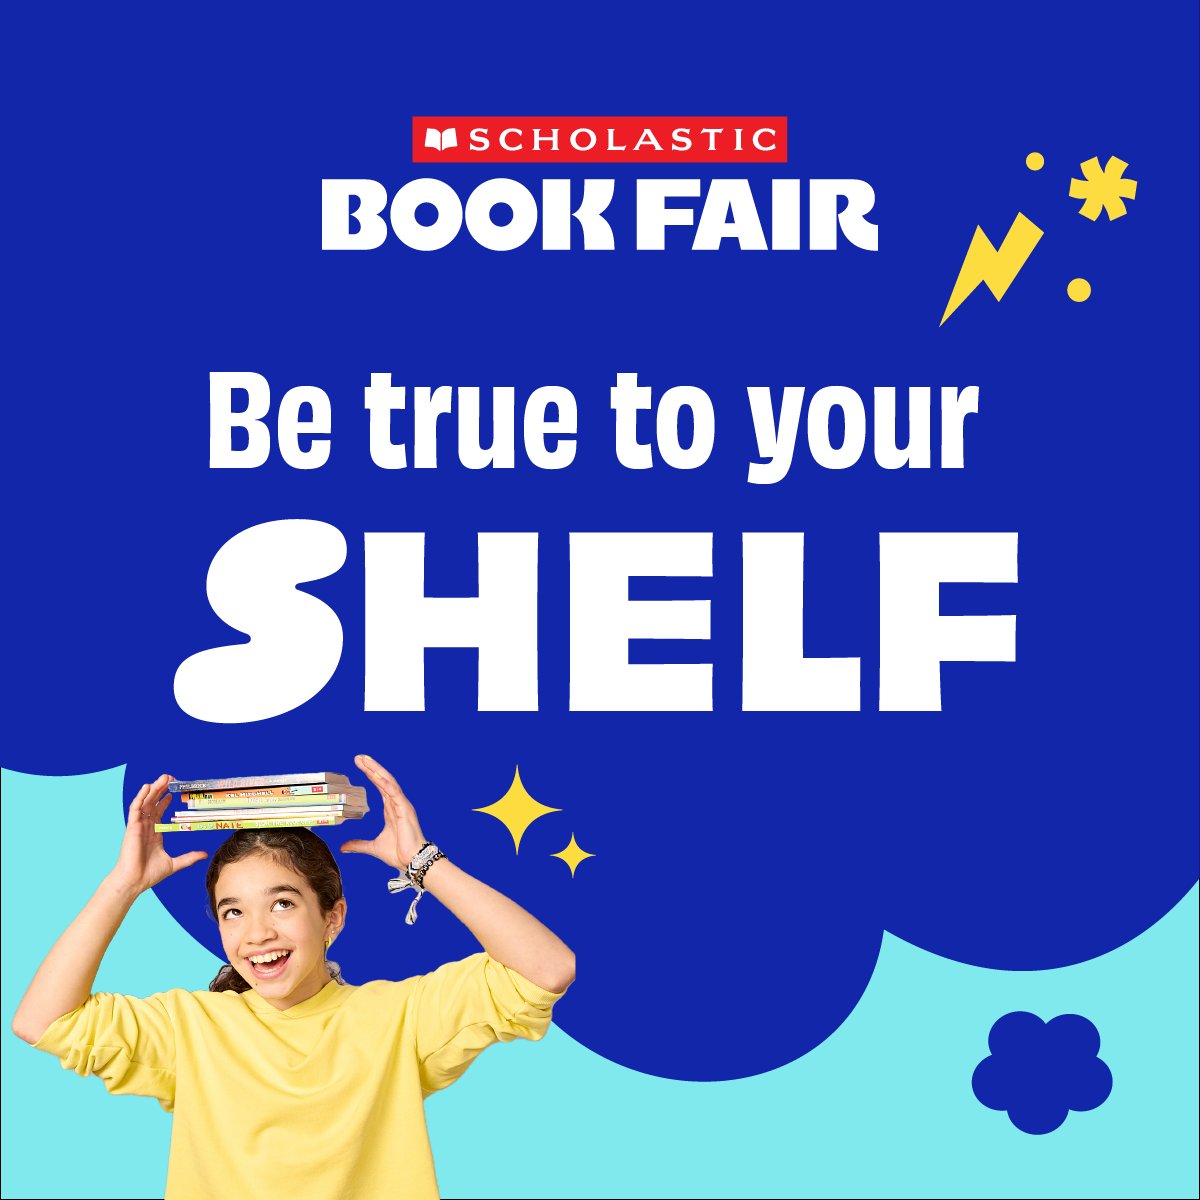 This week is our annual Scholastic Book Fair! 📚🐆🌈🍎📖 Join us tomorrow, February 27 for Family Night from 4-6pm! 📚 Our amazing book fair will be open from Feb 26-March 1!📖🐆 #ScholasticBookFair #Library #Books #Greeting #FamilyNight #Scholastic #dvusd @Scholastic